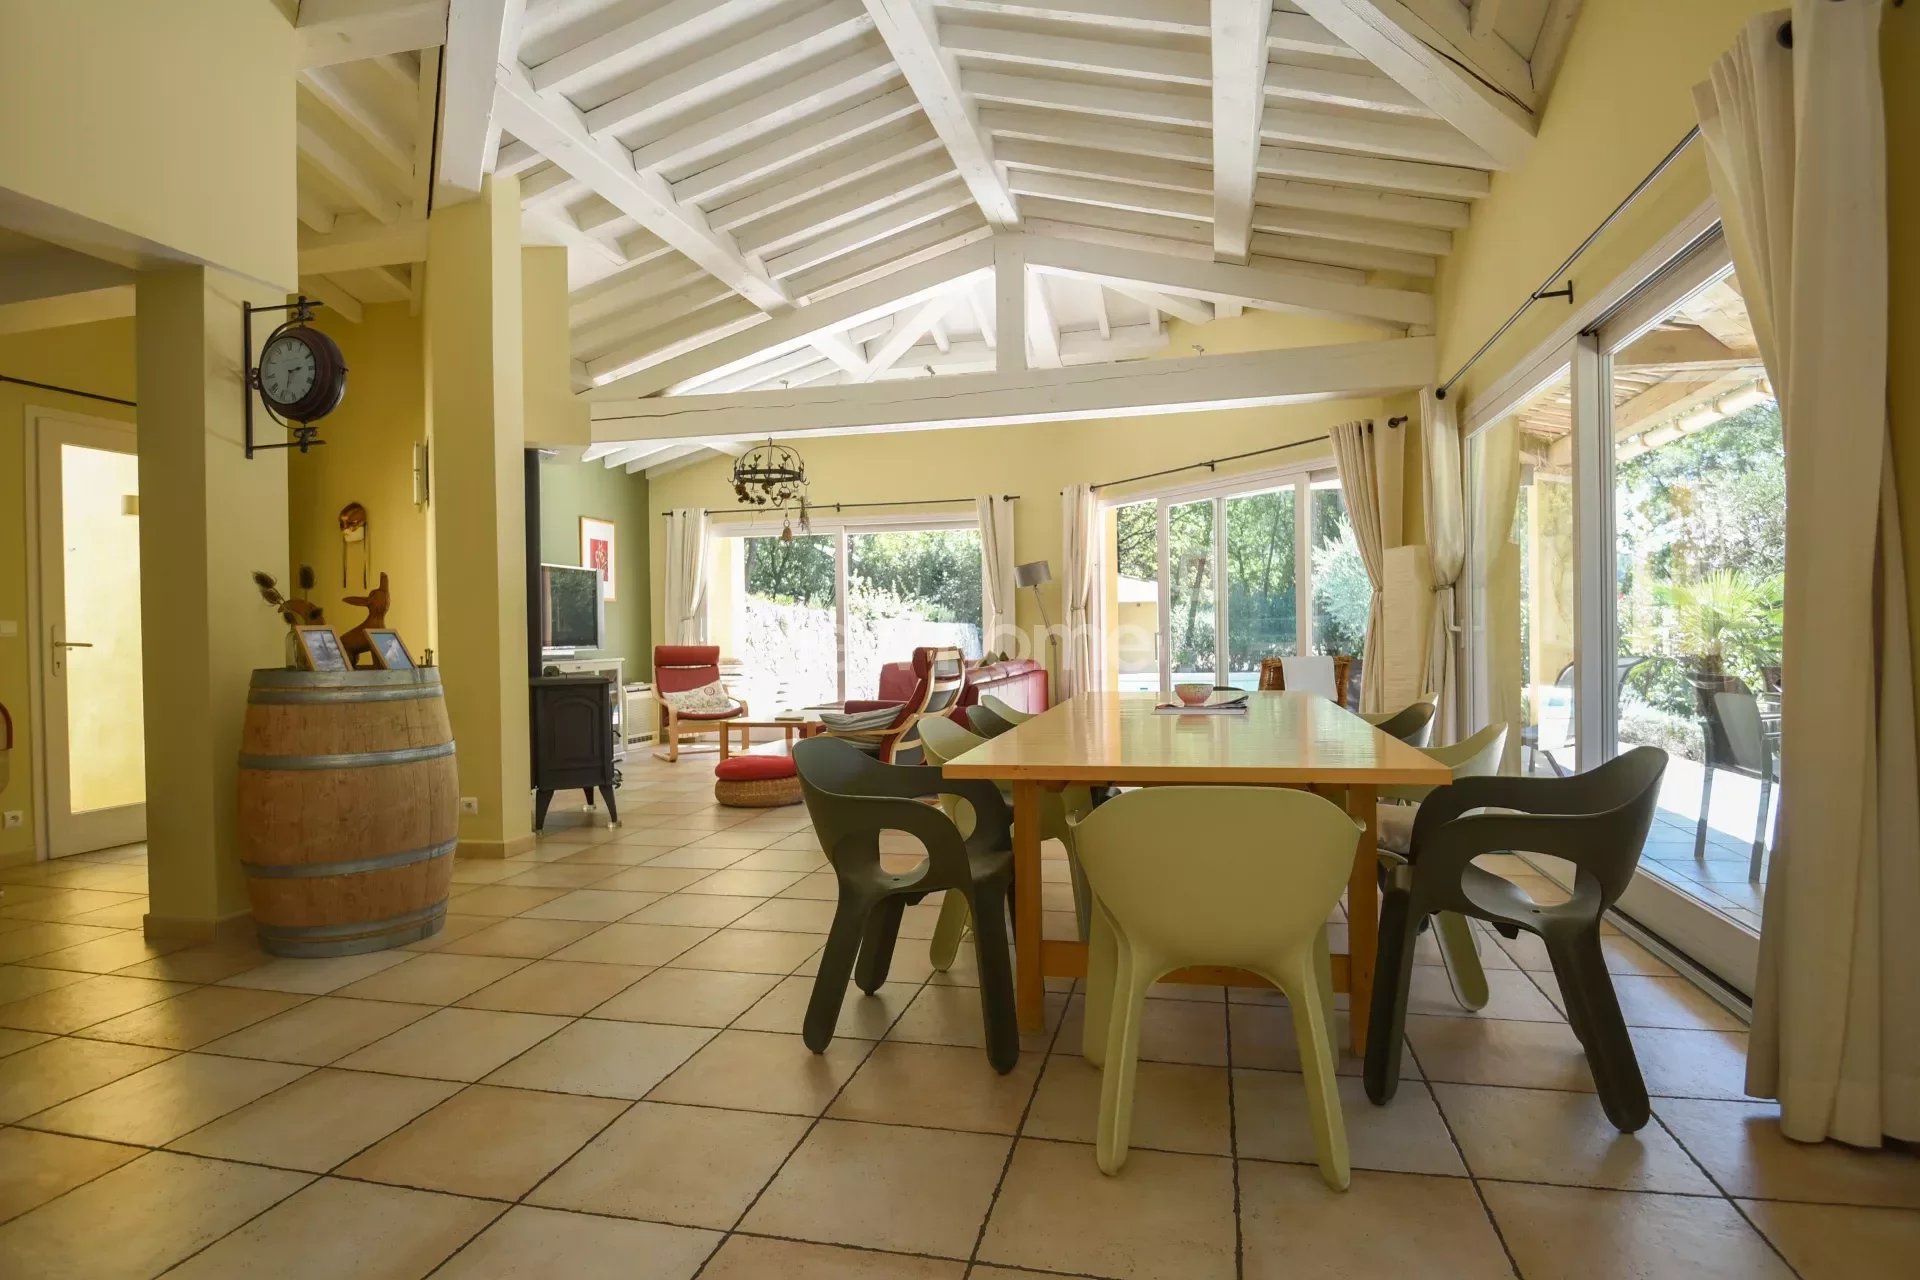 Spacious villa in good condition with heated swimming pool.